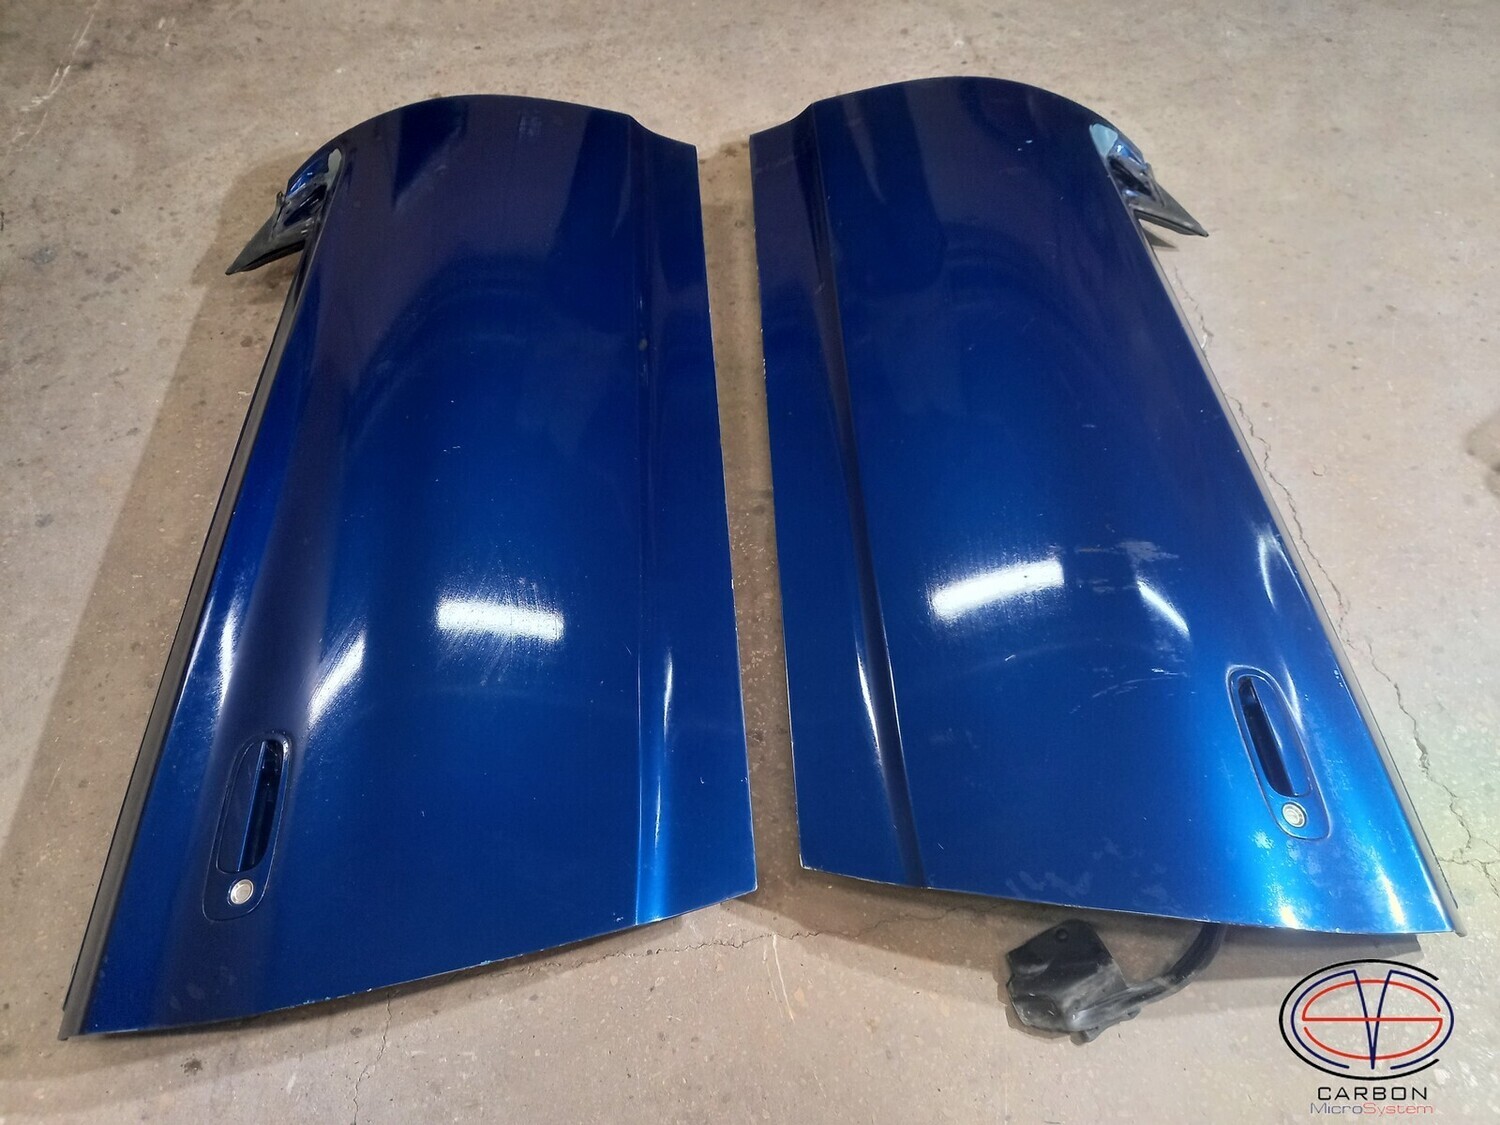 Doors for Toyota Celica T23 from Carbon Fiber